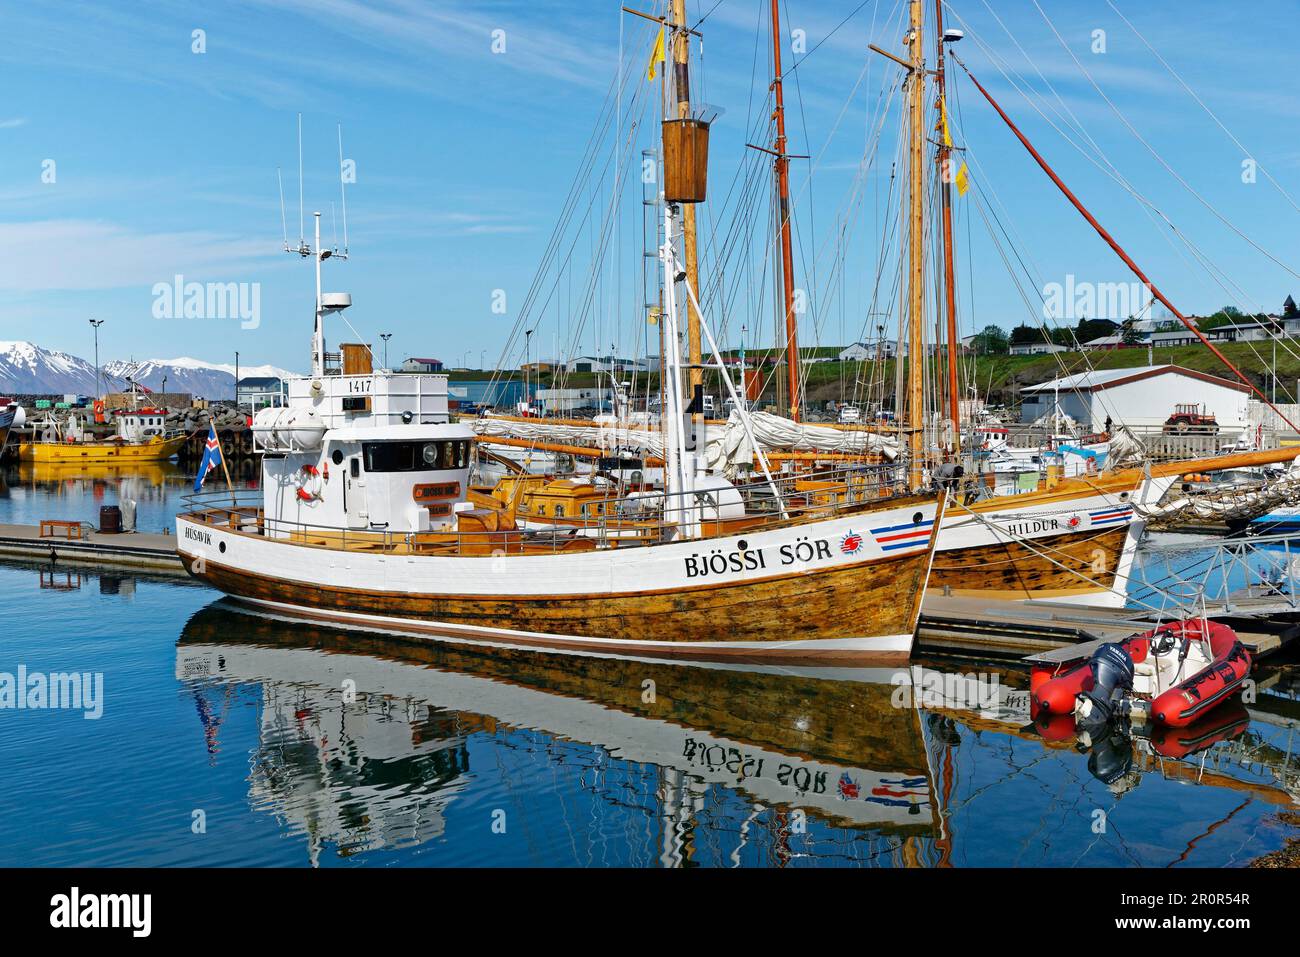 https://c8.alamy.com/comp/2R0R54R/old-fishing-boats-are-used-for-whale-watching-harbour-of-husavik-husavik-iceland-2R0R54R.jpg